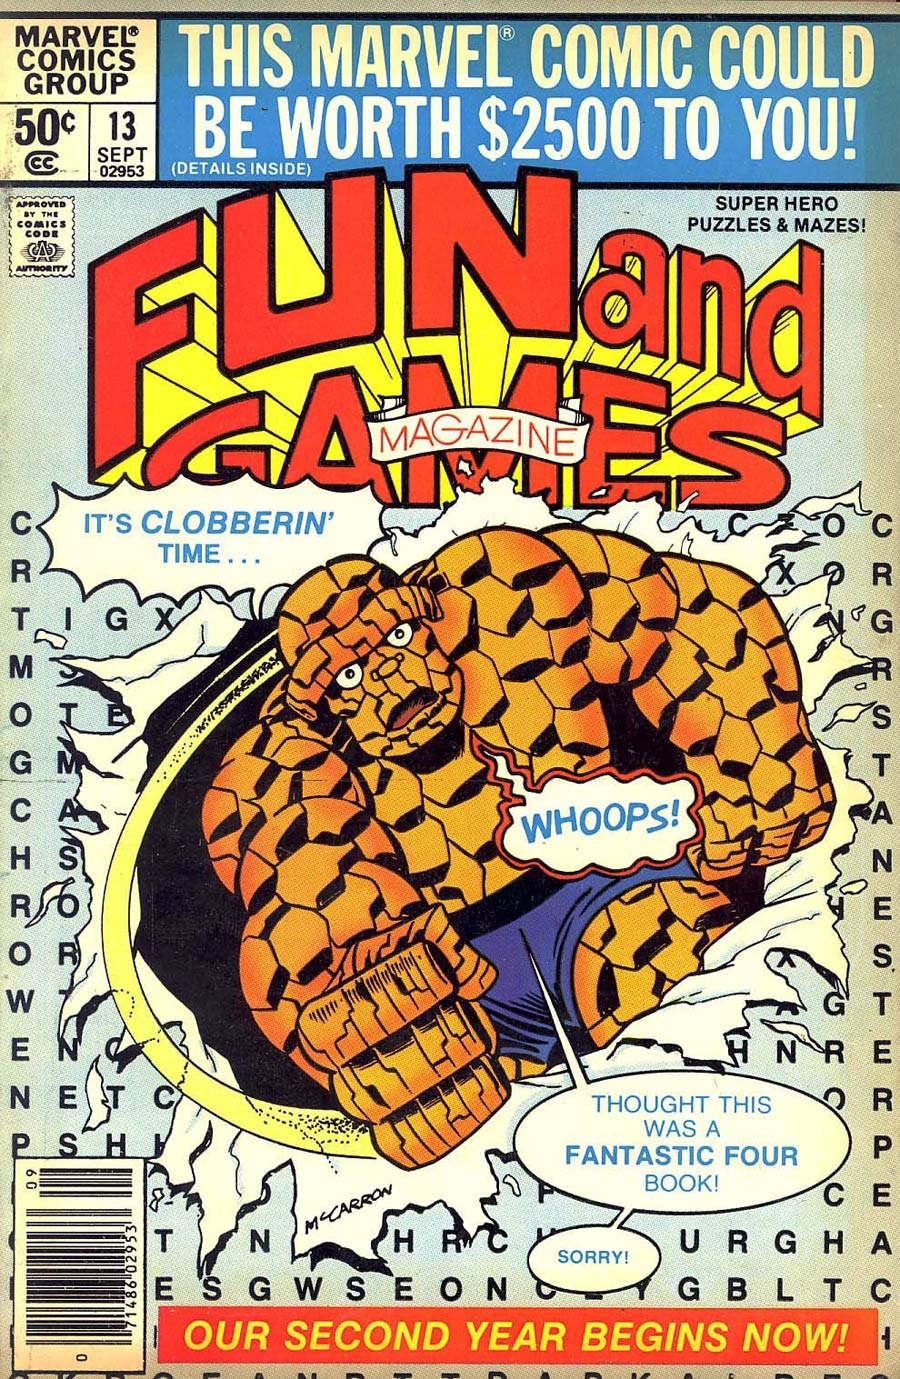 Marvel Fun and Games #13 Cover B Used